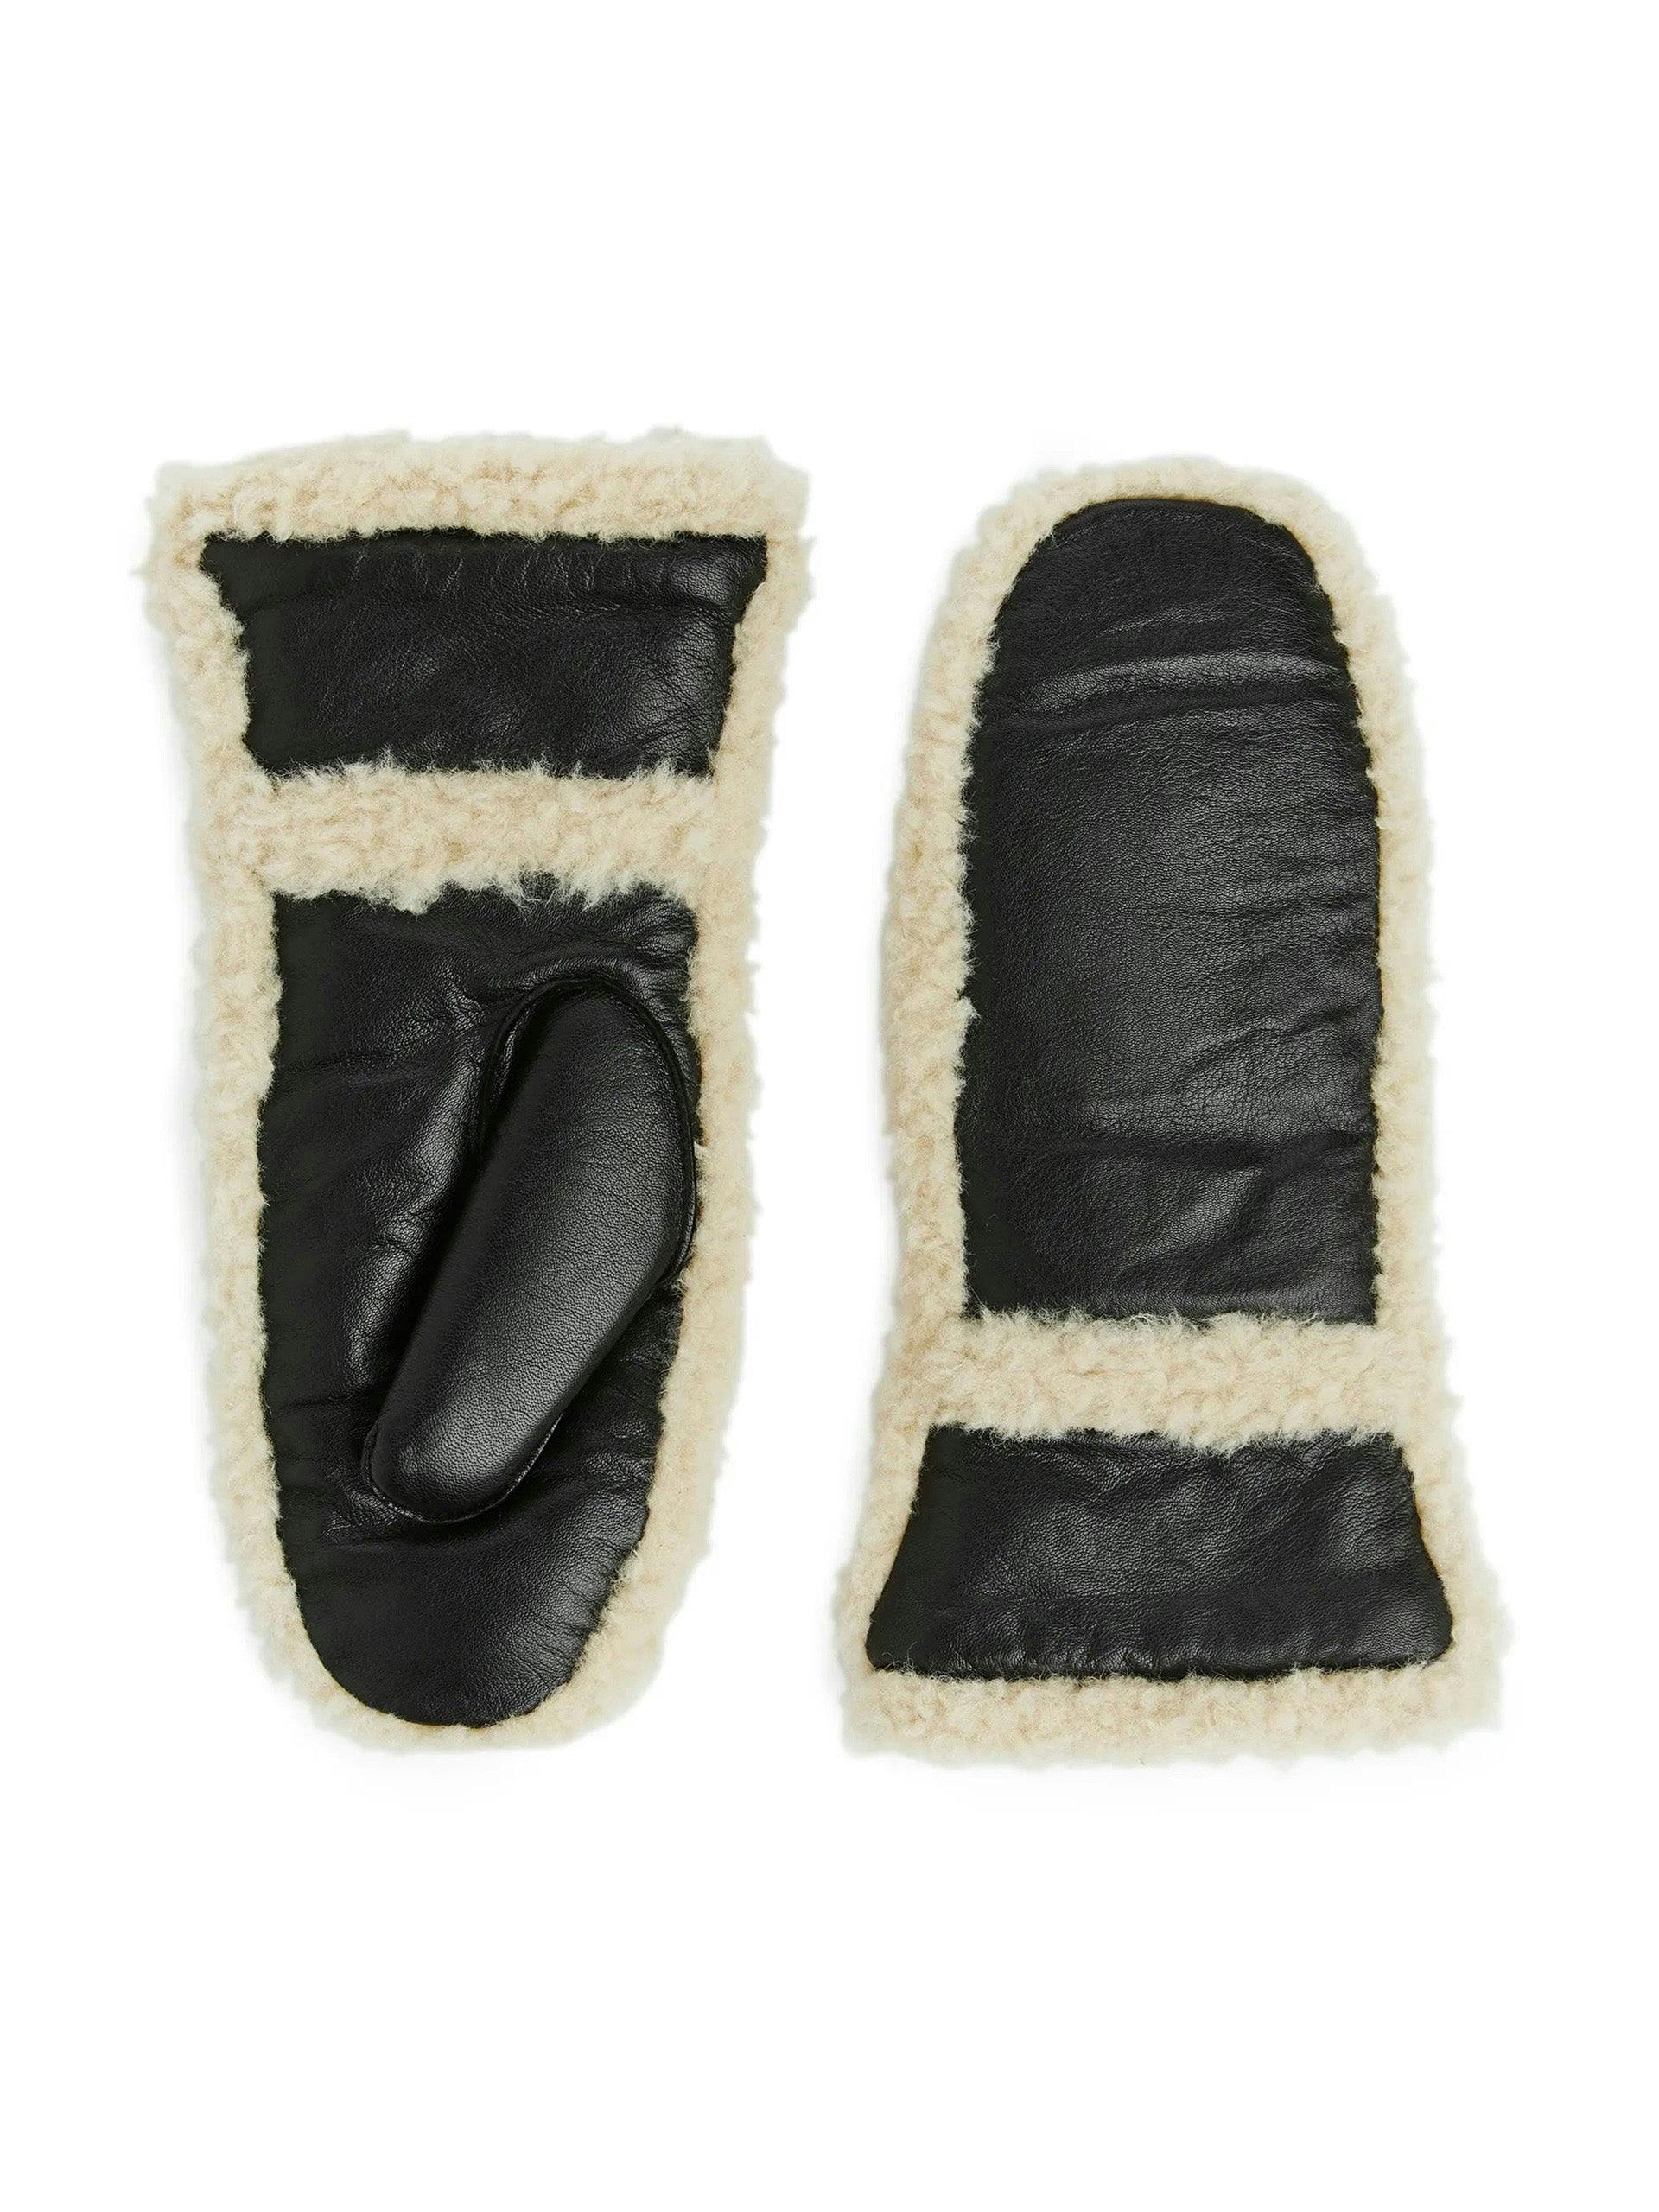 Leather shearling mittens